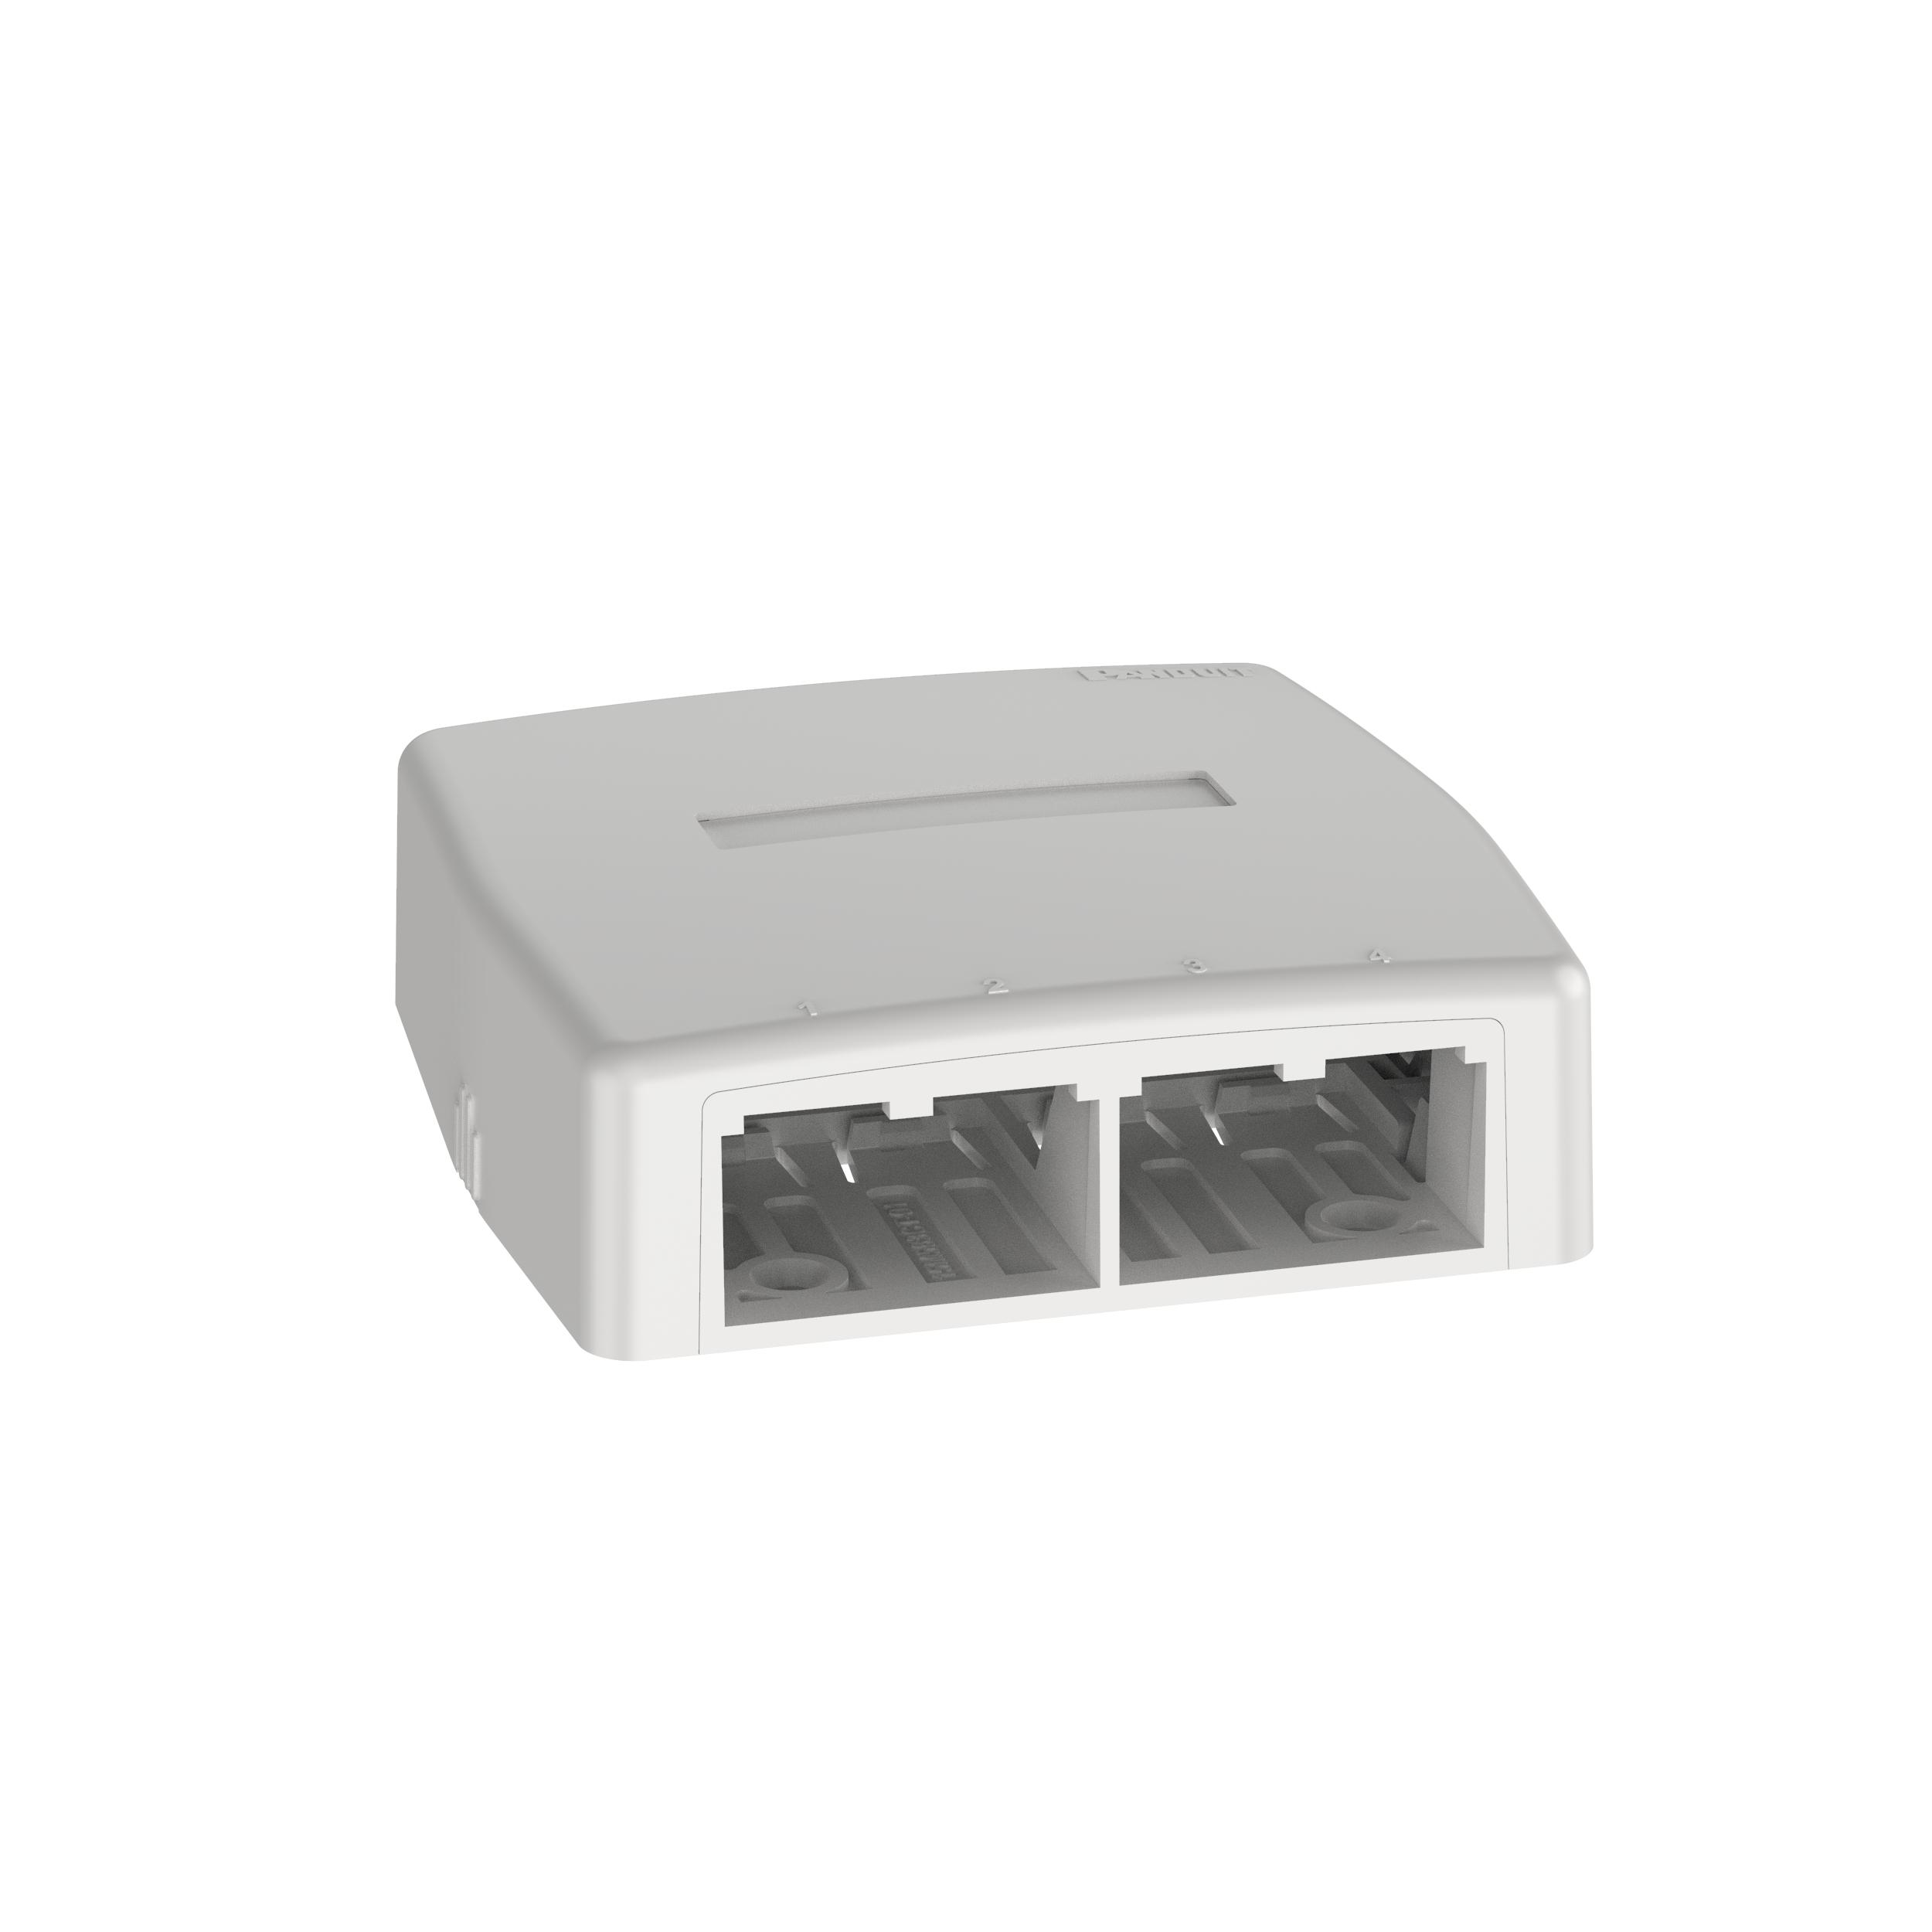 Panduit CBXQ4IW-A SURFACE MNT BOX 4-PORT MINICOMW/ QUICK RELEASE COVER ANDADHESIVE, OFF WHITE